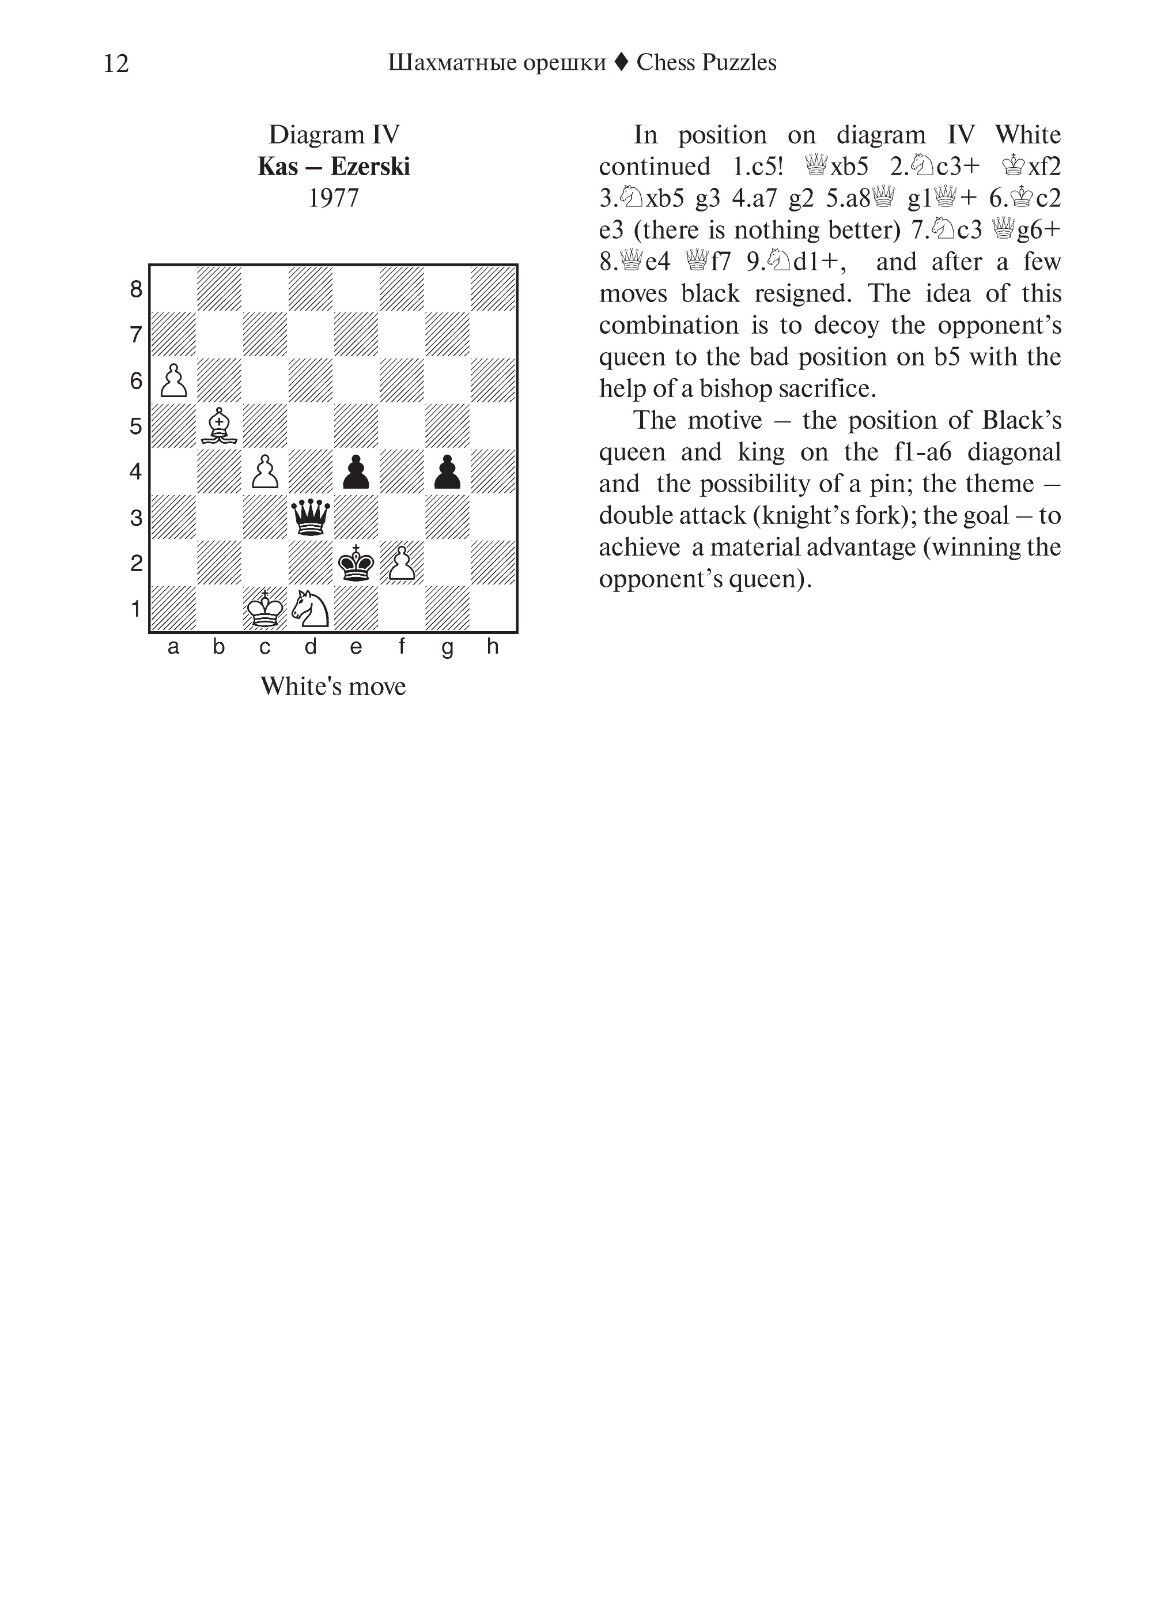 10970.Book: Manual of Chess Combinations. Chess Nuts. 400 Tactical Exercises. 2021